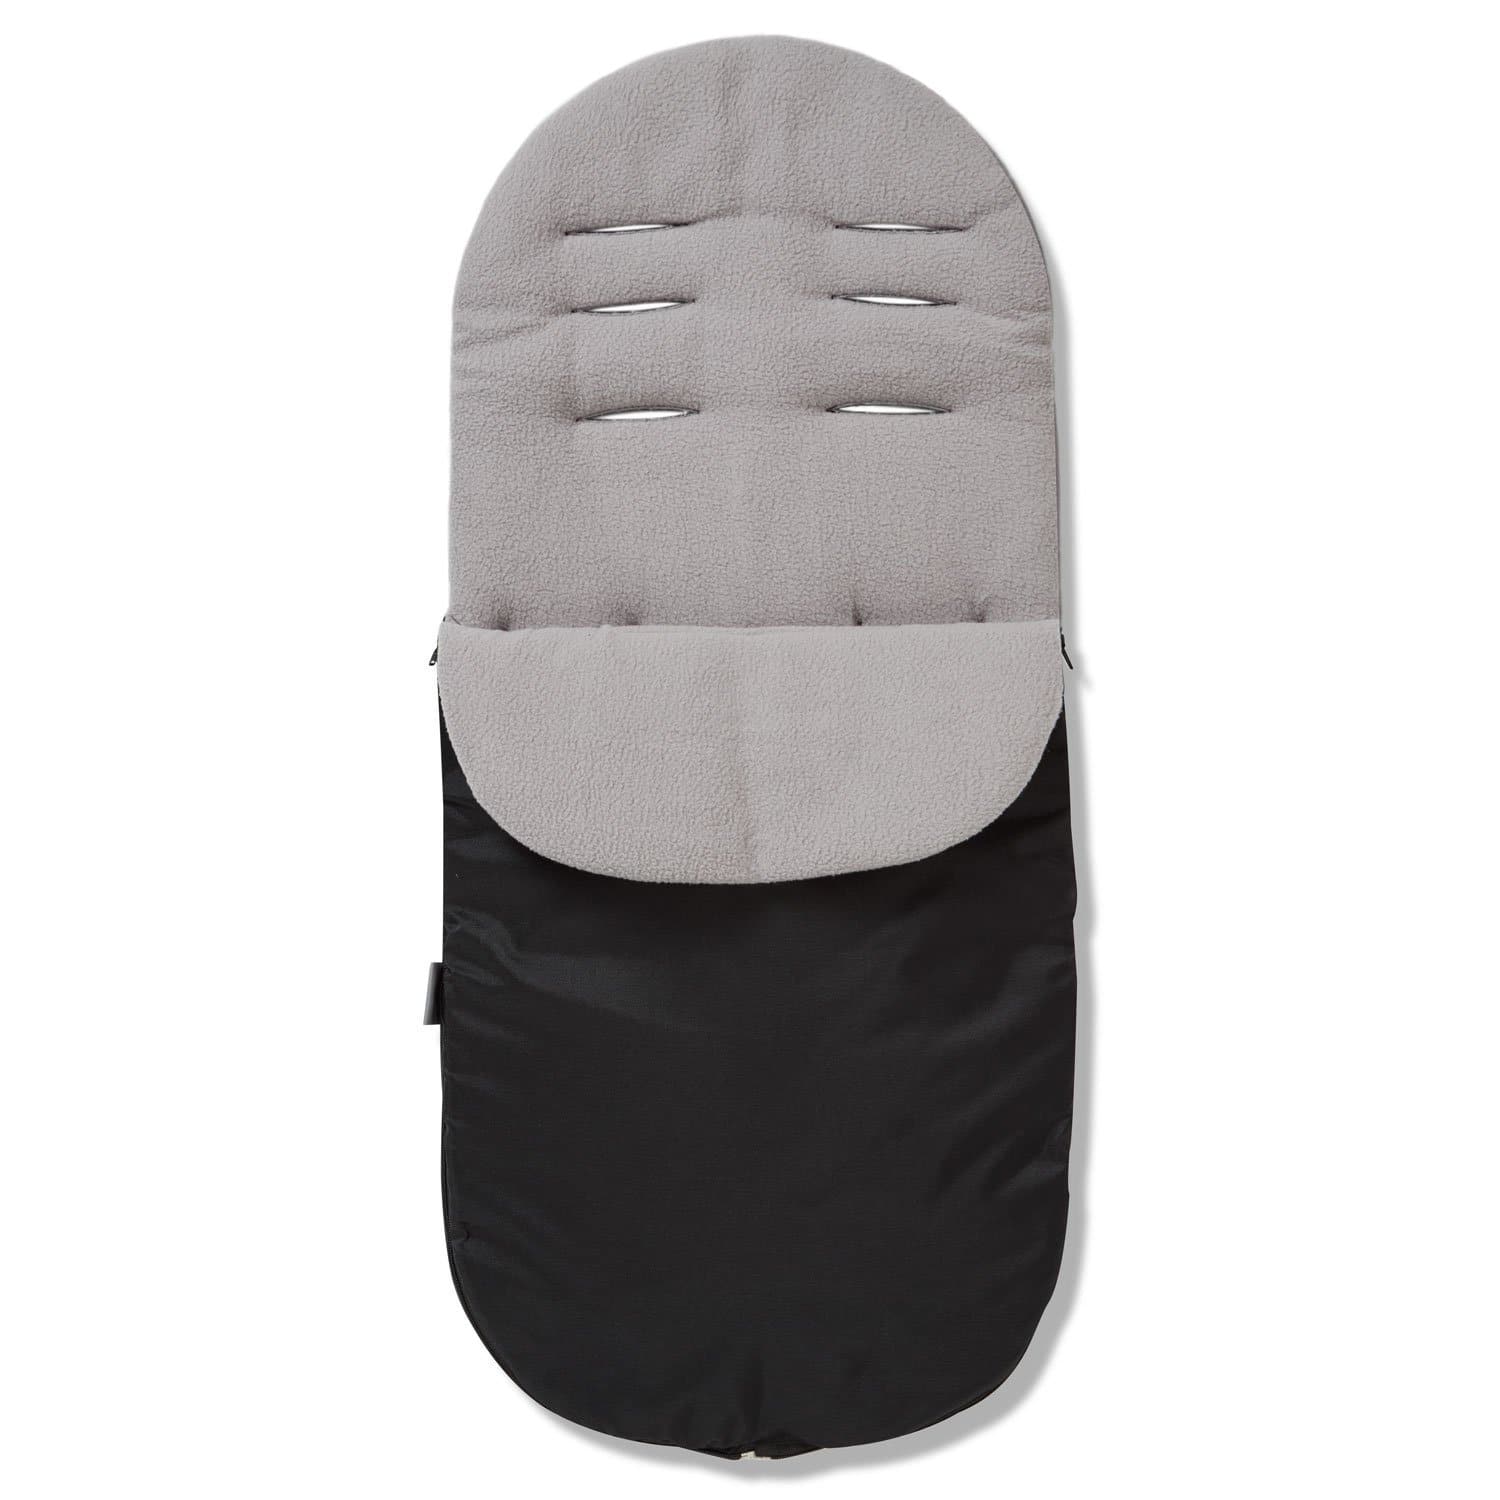 Footmuff / Cosy Toes Compatible with Tippitoes - Grey / Fits All Models | For Your Little One